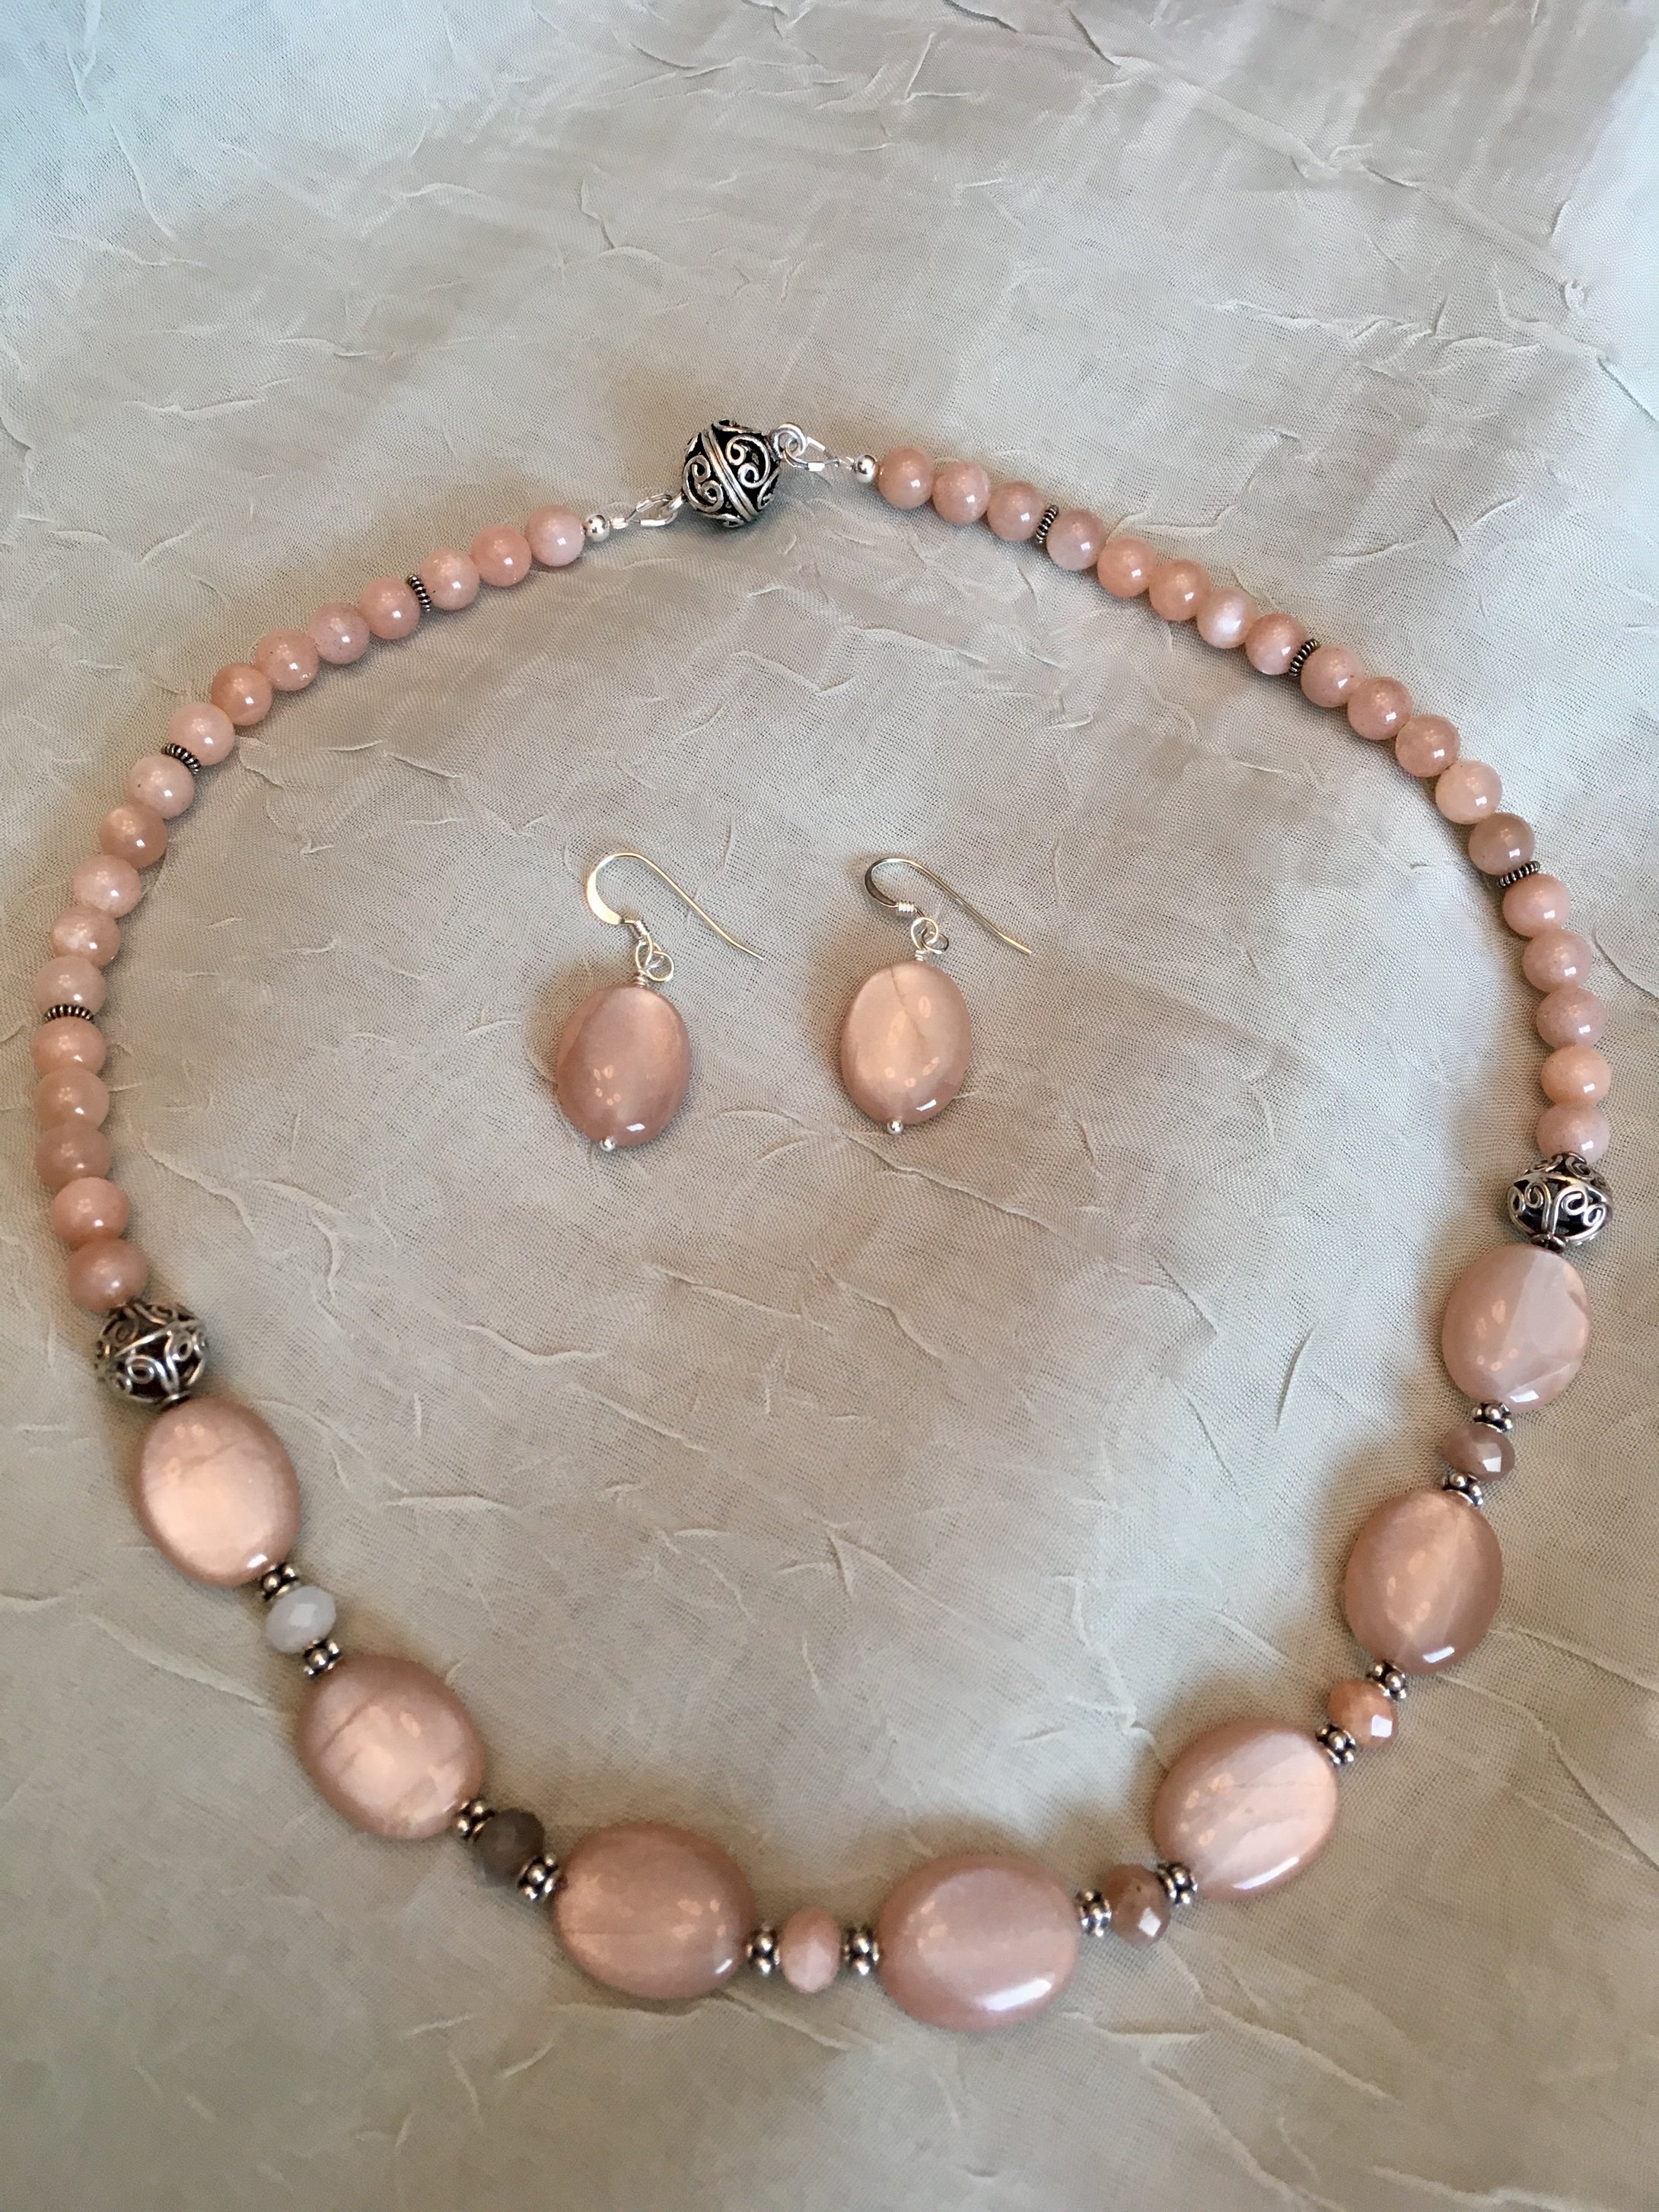 Peach Moonstone Ovals & Rounds, Bali Silver.  17 1.2